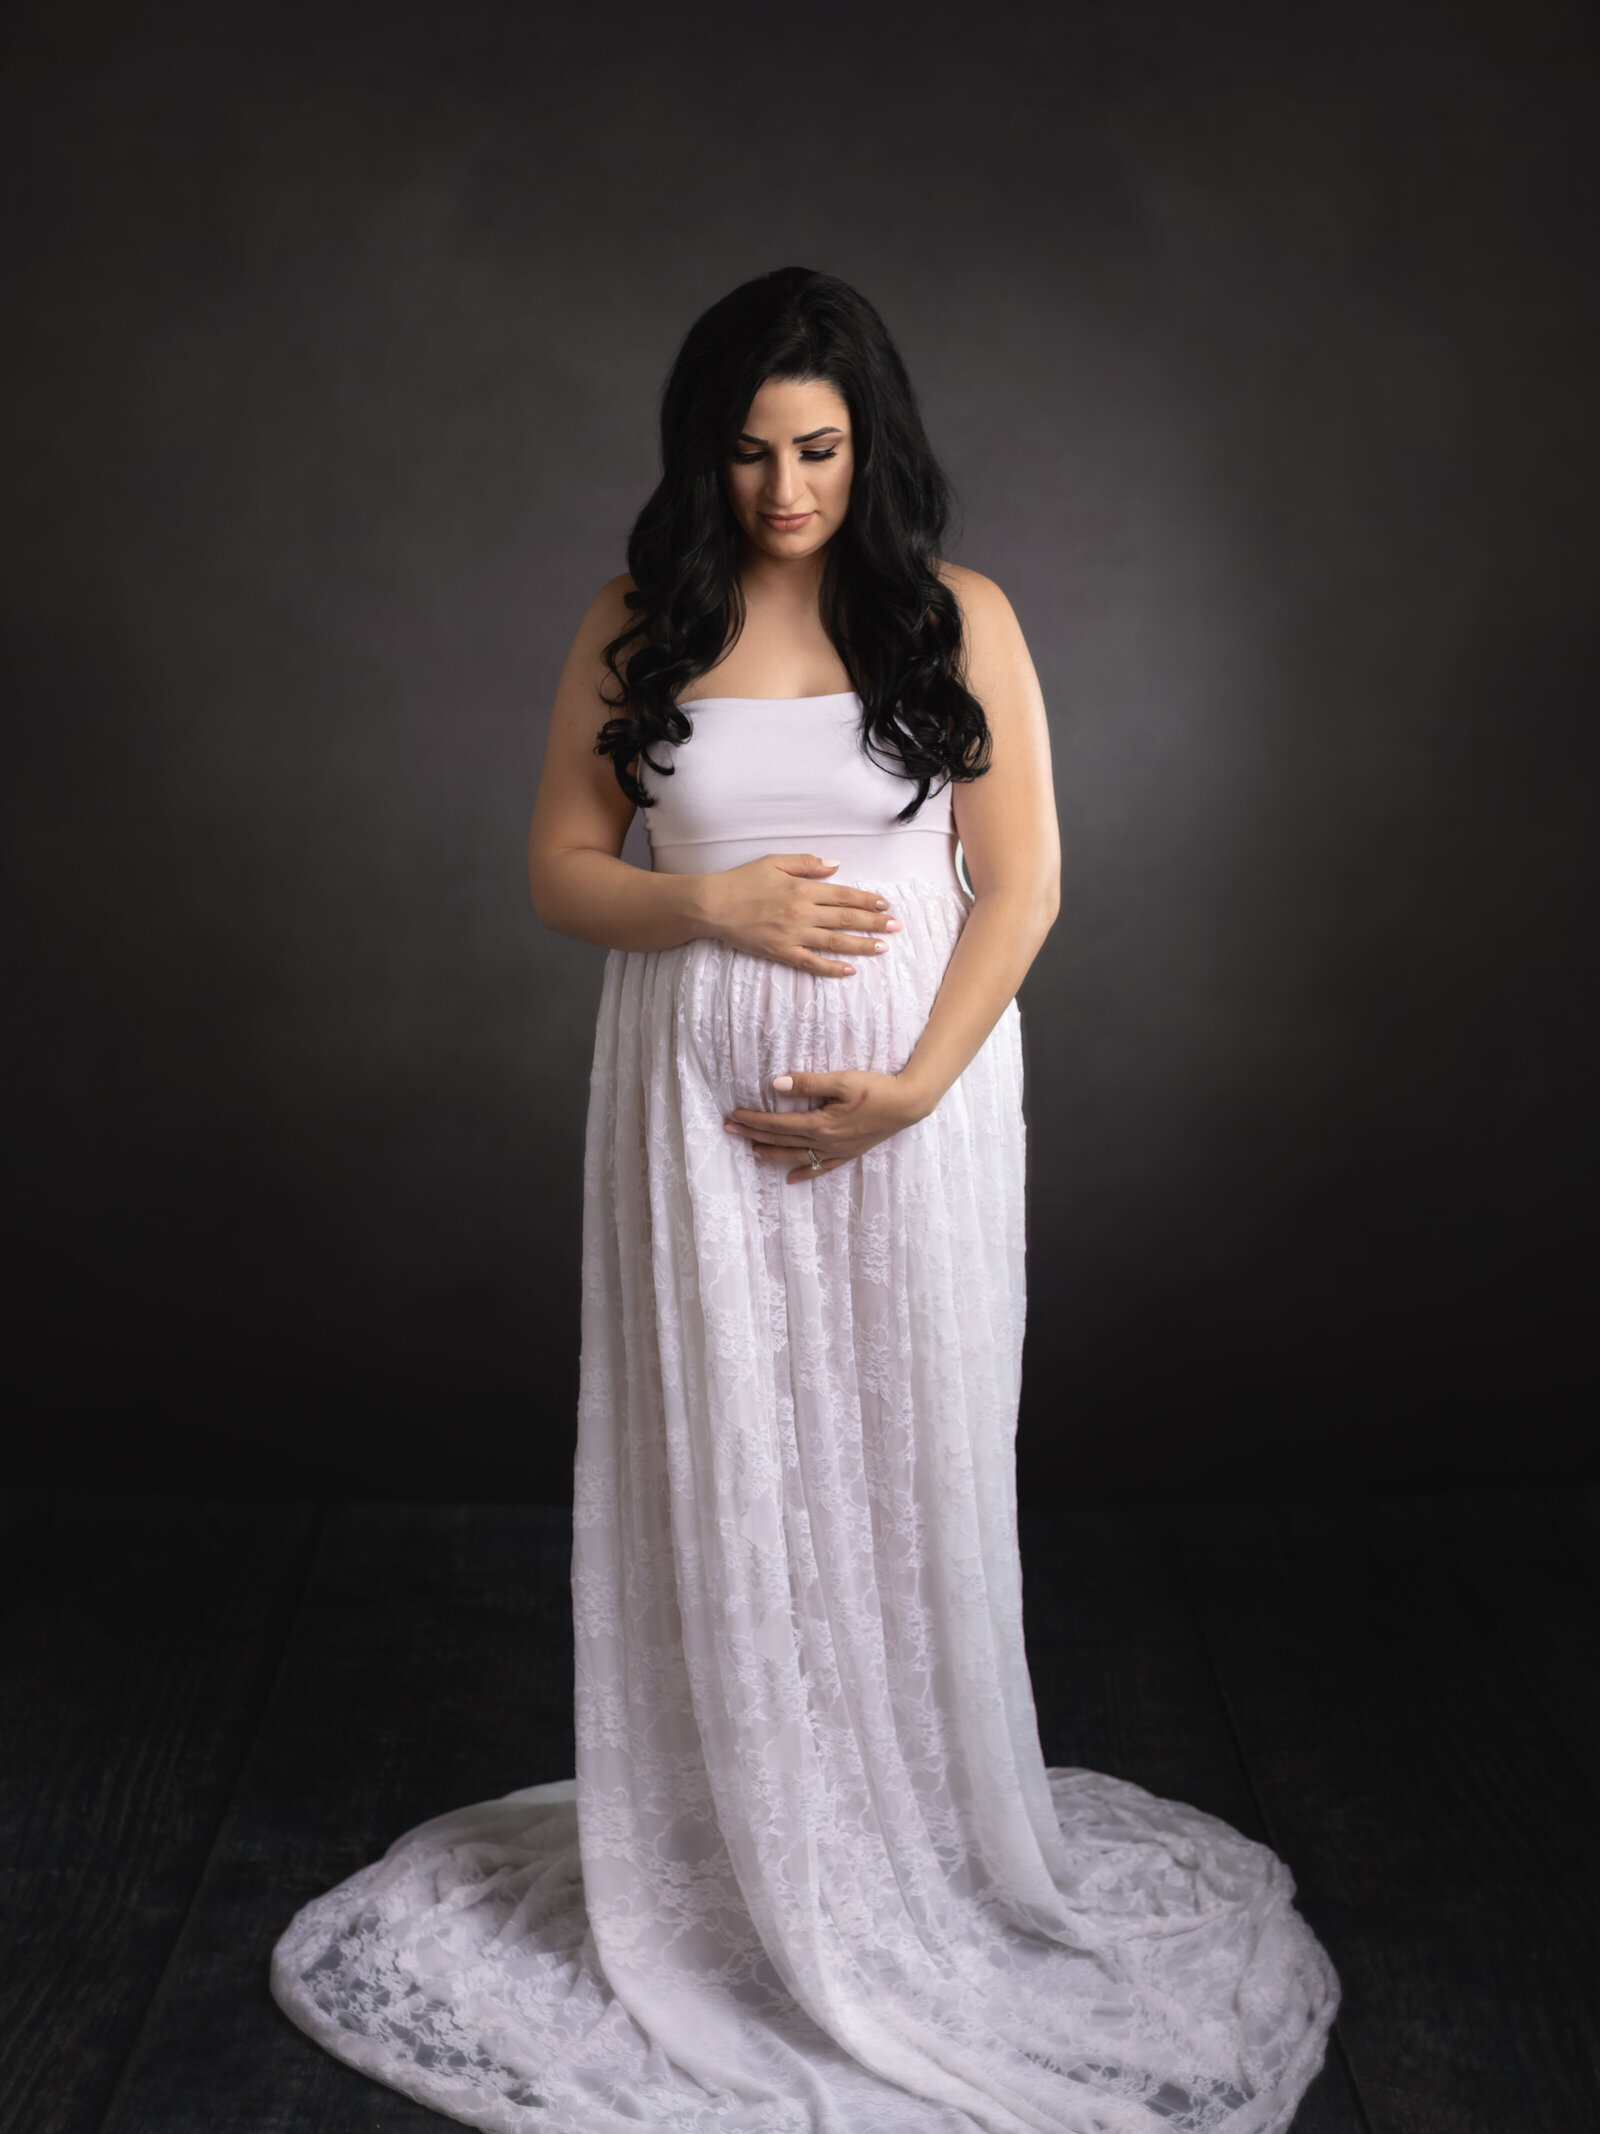 pregnant woman wearing white lace dress for photoshoot